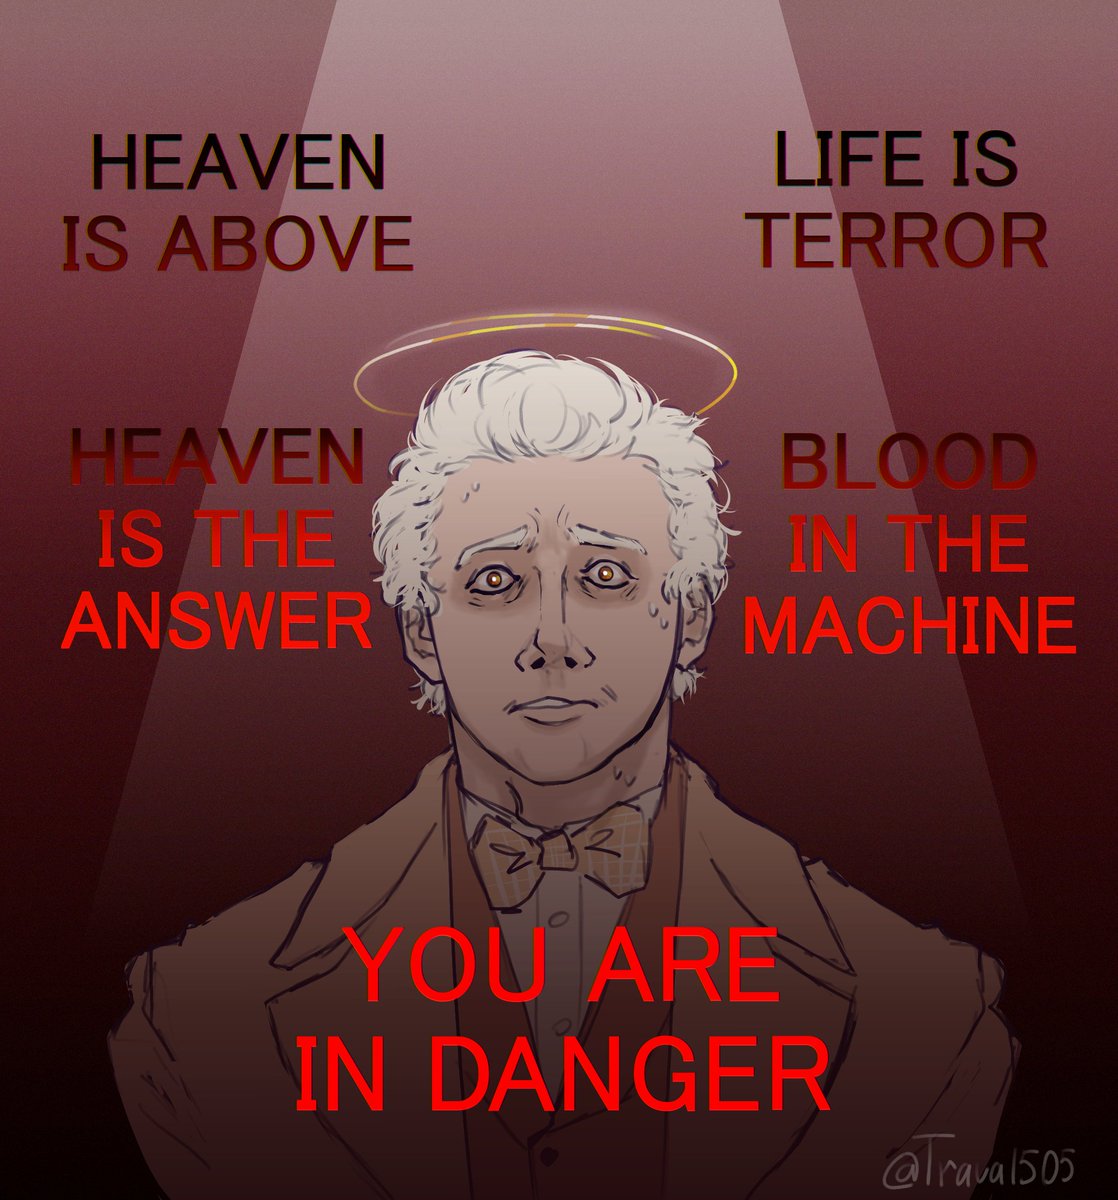 Now spell 'ANSWER' - F R E E D O M WRONG! Try again :) Now spell 'SINNER' - F R I E N D S WRONG! The correct spelling is Y O U #GoodOmens2 #Aziraphale